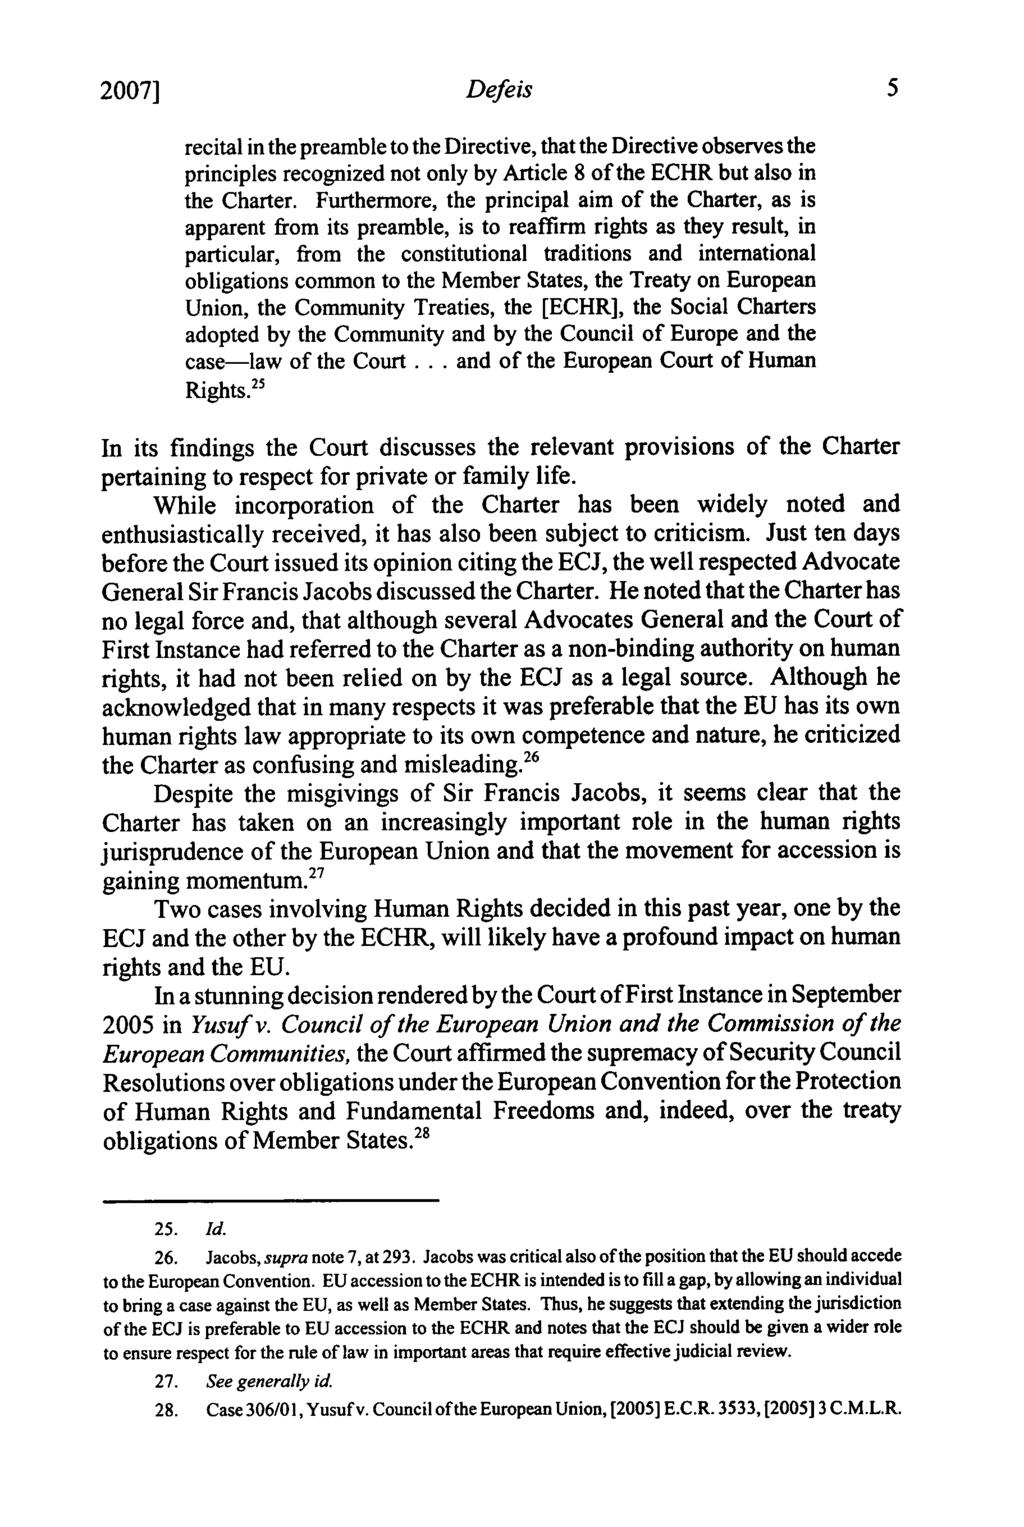 2007] Defeis recital in the preamble to the Directive, that the Directive observes the principles recognized not only by Article 8 of the ECHR but also in the Charter.